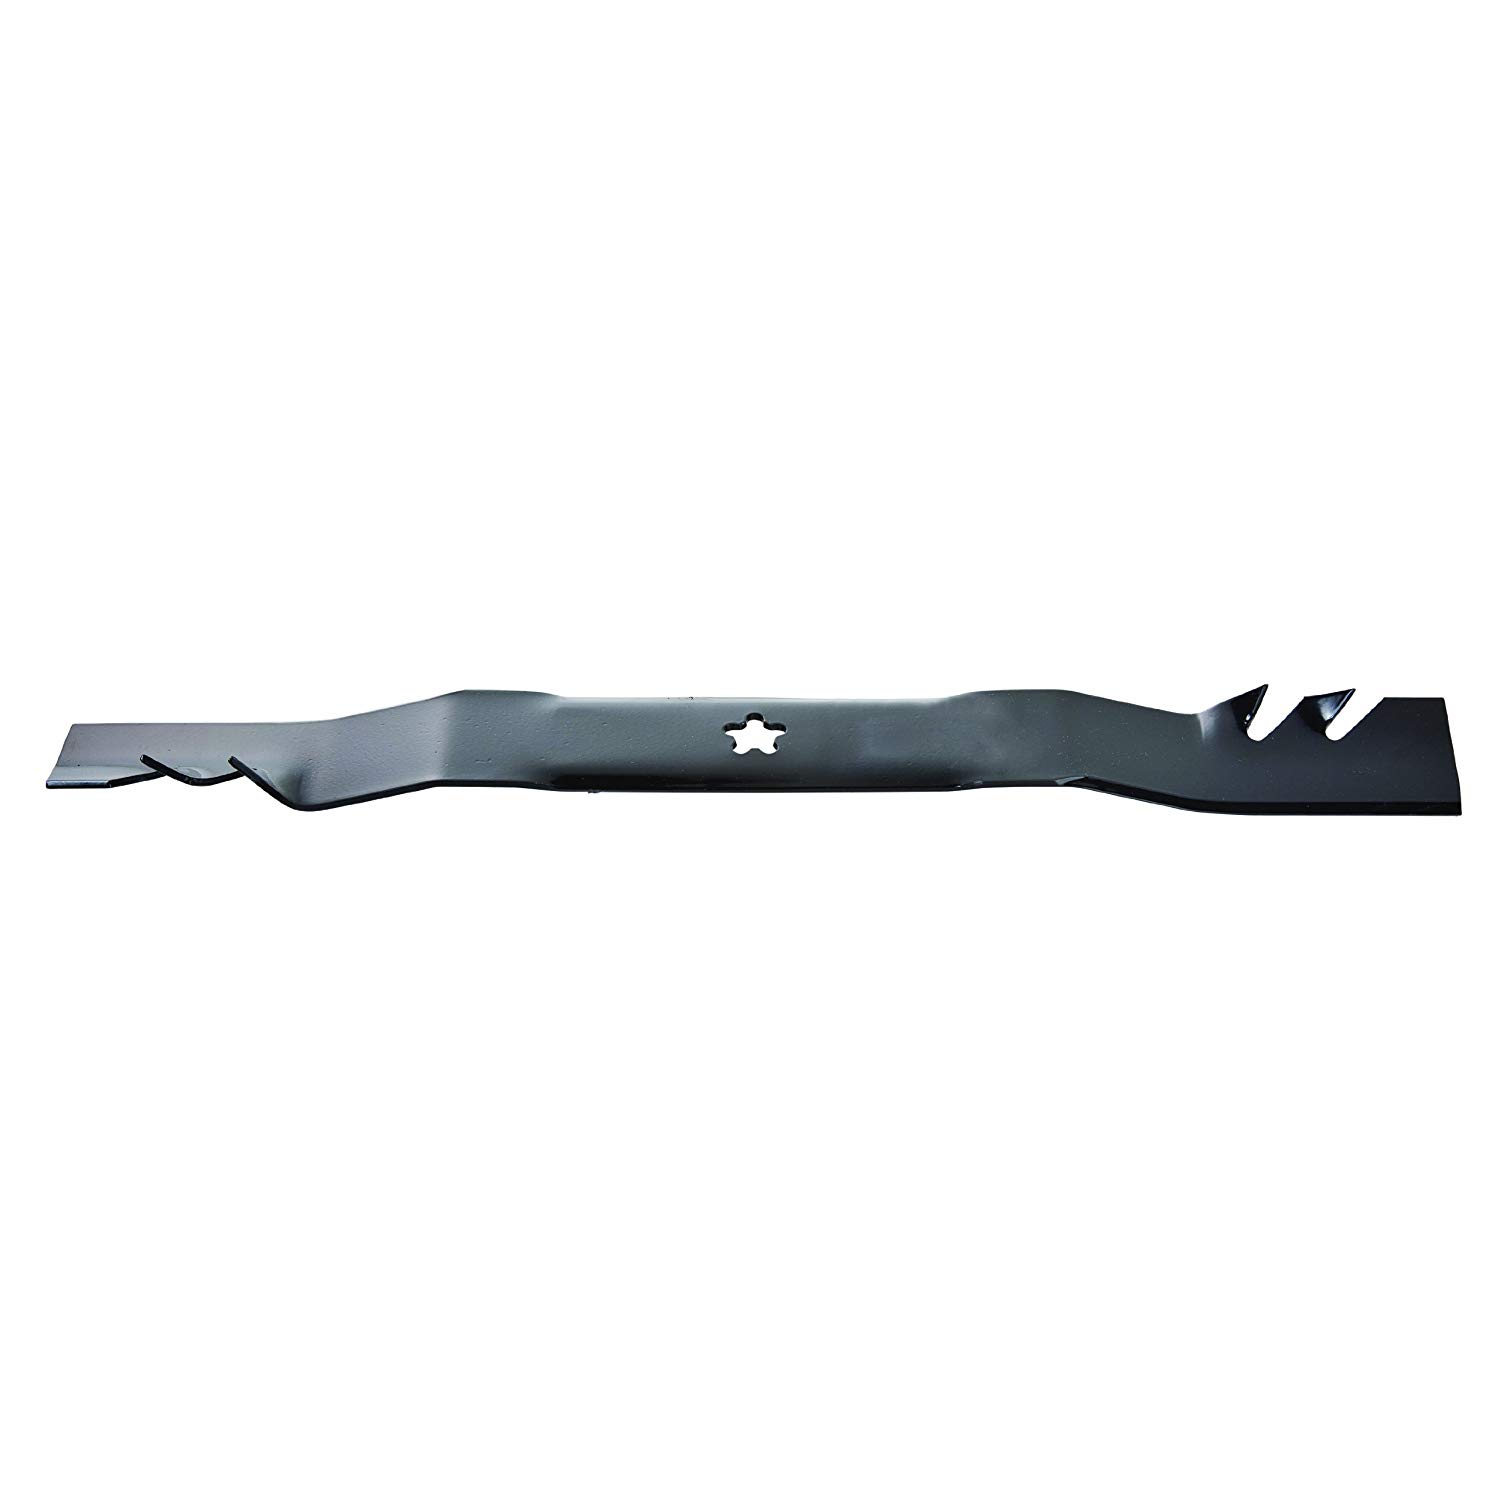 95-615 Replacement Gator Mulcher Lawn Mower Blade for AYP 21-15/16 Inch, Length: 21-15/16 inches By Oregon - image 1 of 1